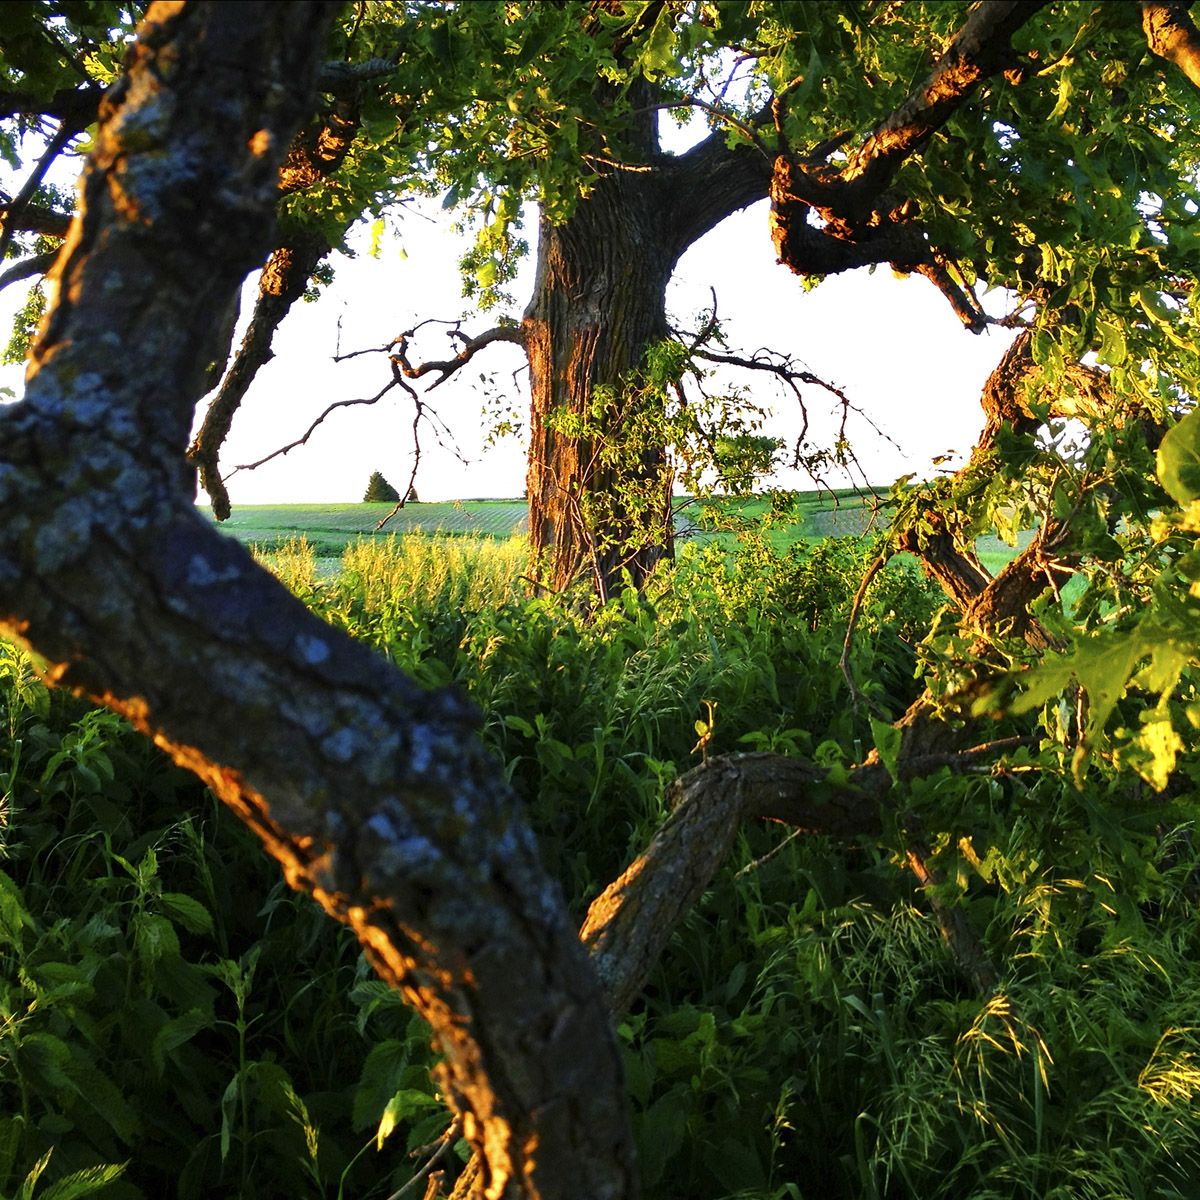 Guideposts: The gnarly limbs of That Tree frame its trunk in the shape of a natural heart.